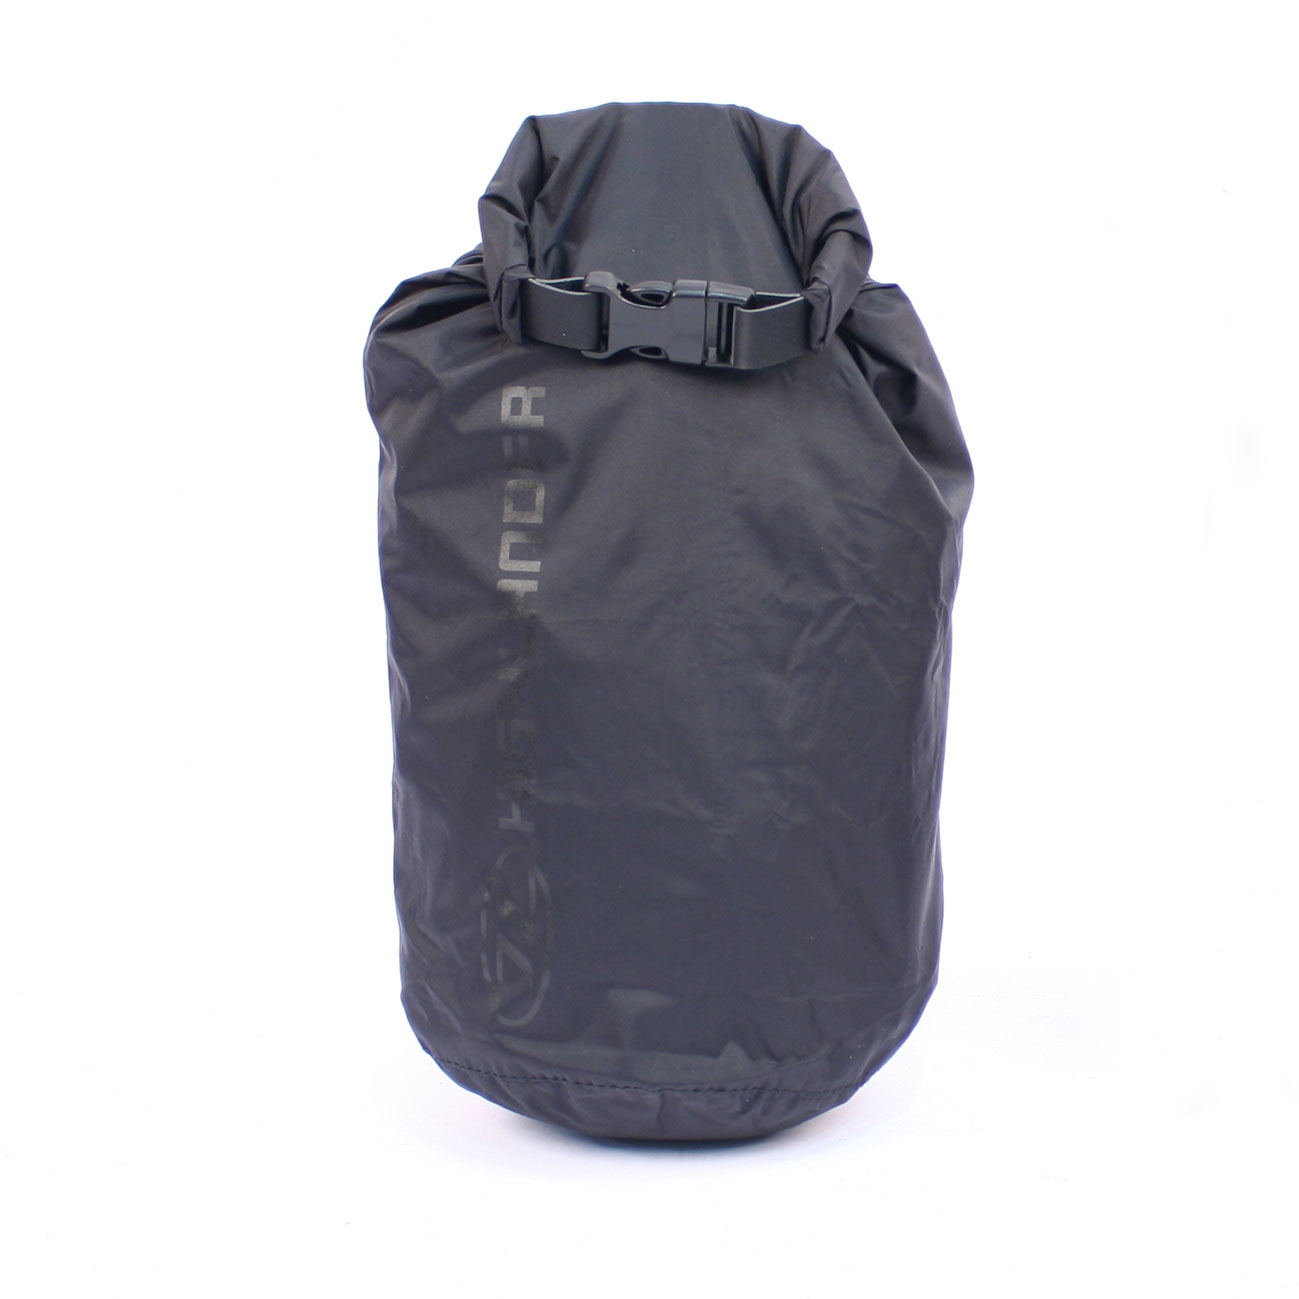 Highlander X-Lite Roll top drybags for Backpacking Drysack Pouch 1 Litre 